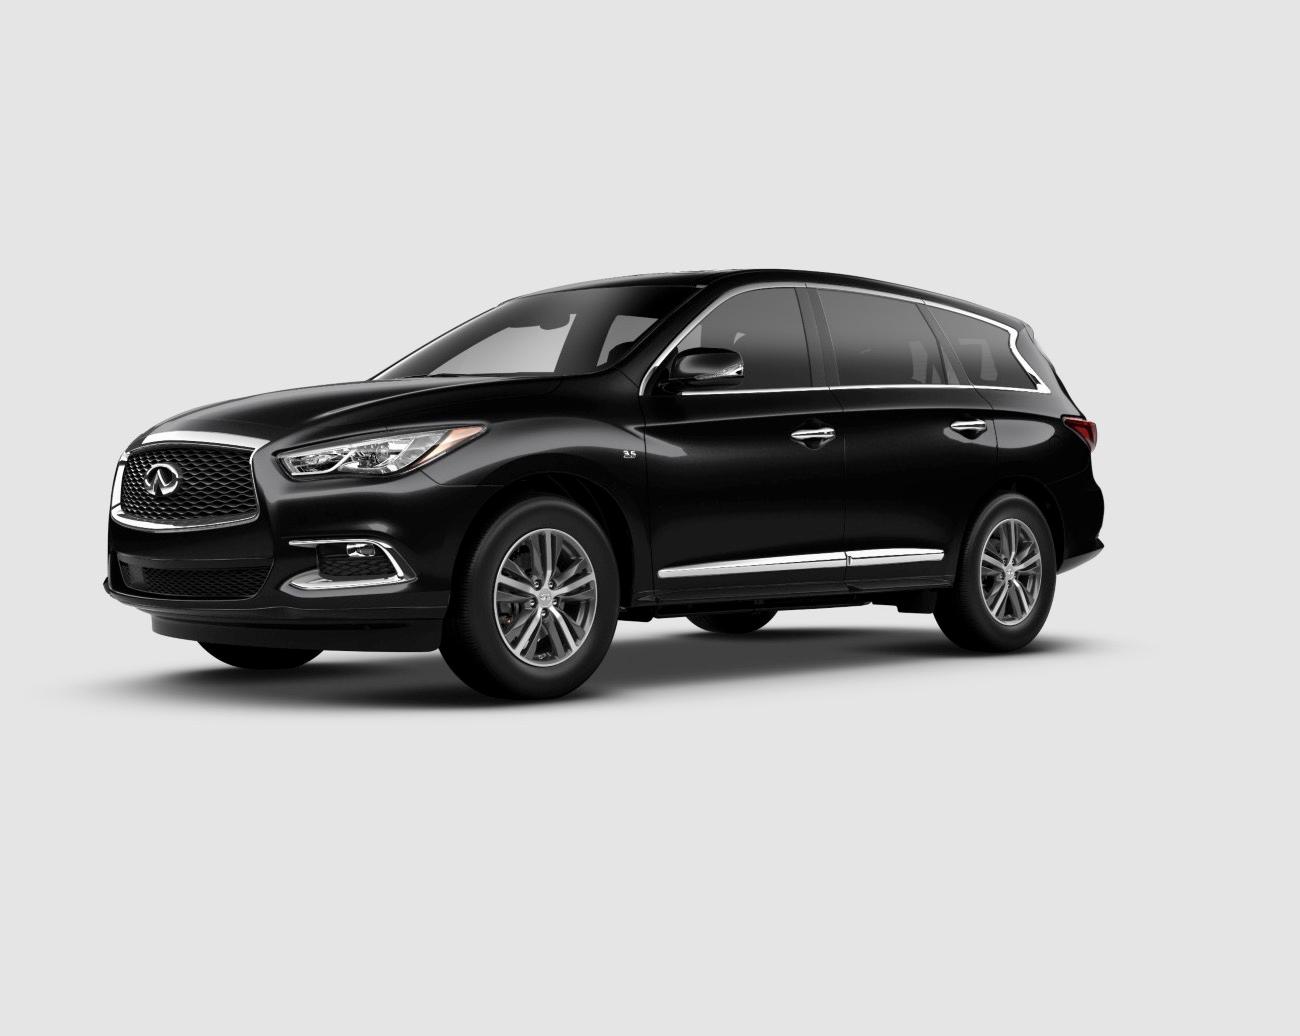 New Infiniti Qx60 Vehicles For Sale In Chantilly Virginia